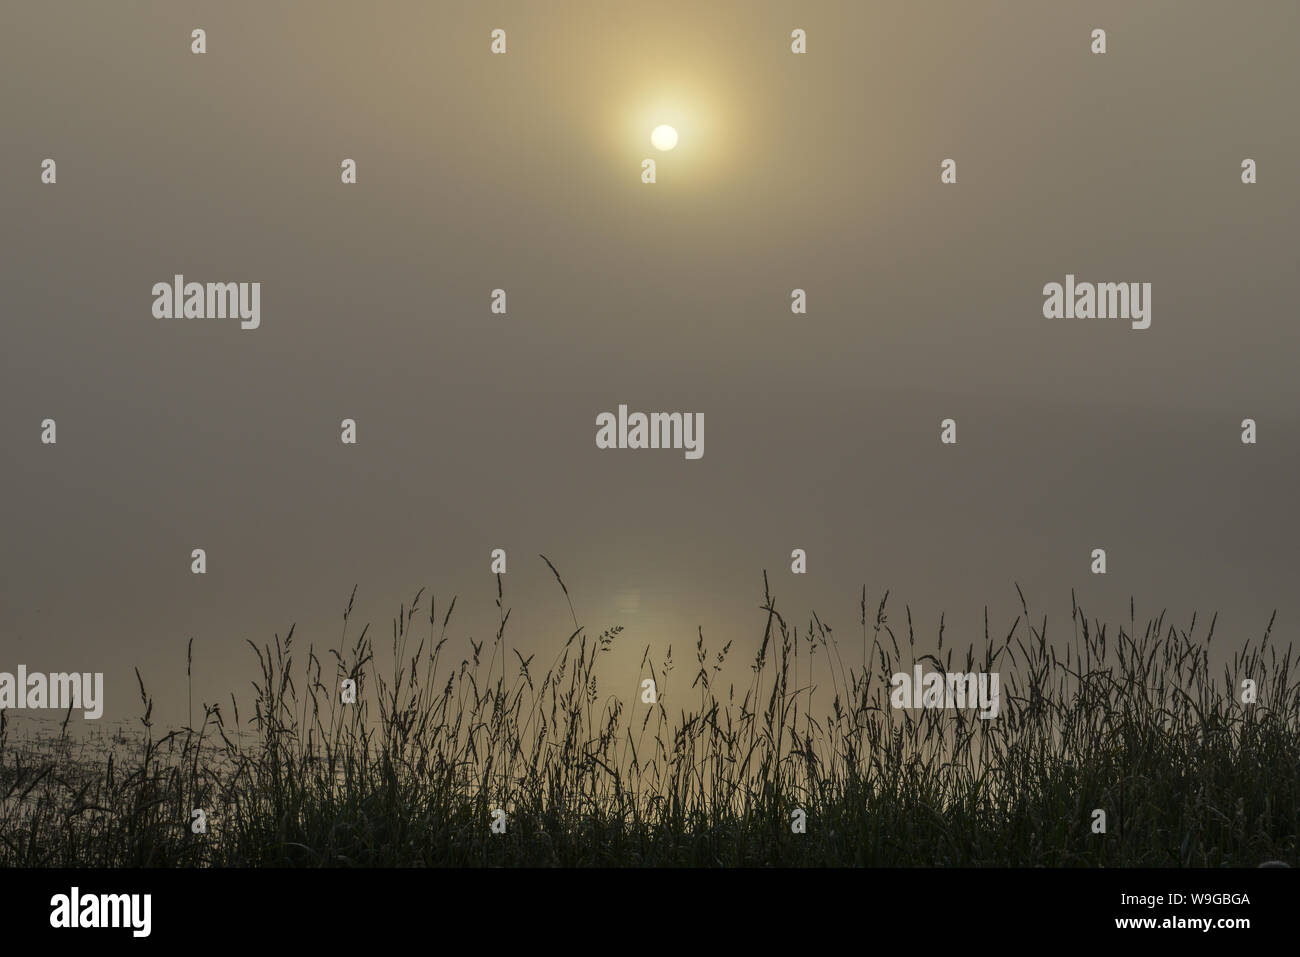 Reeds silhouetted against rising sun Stock Photo